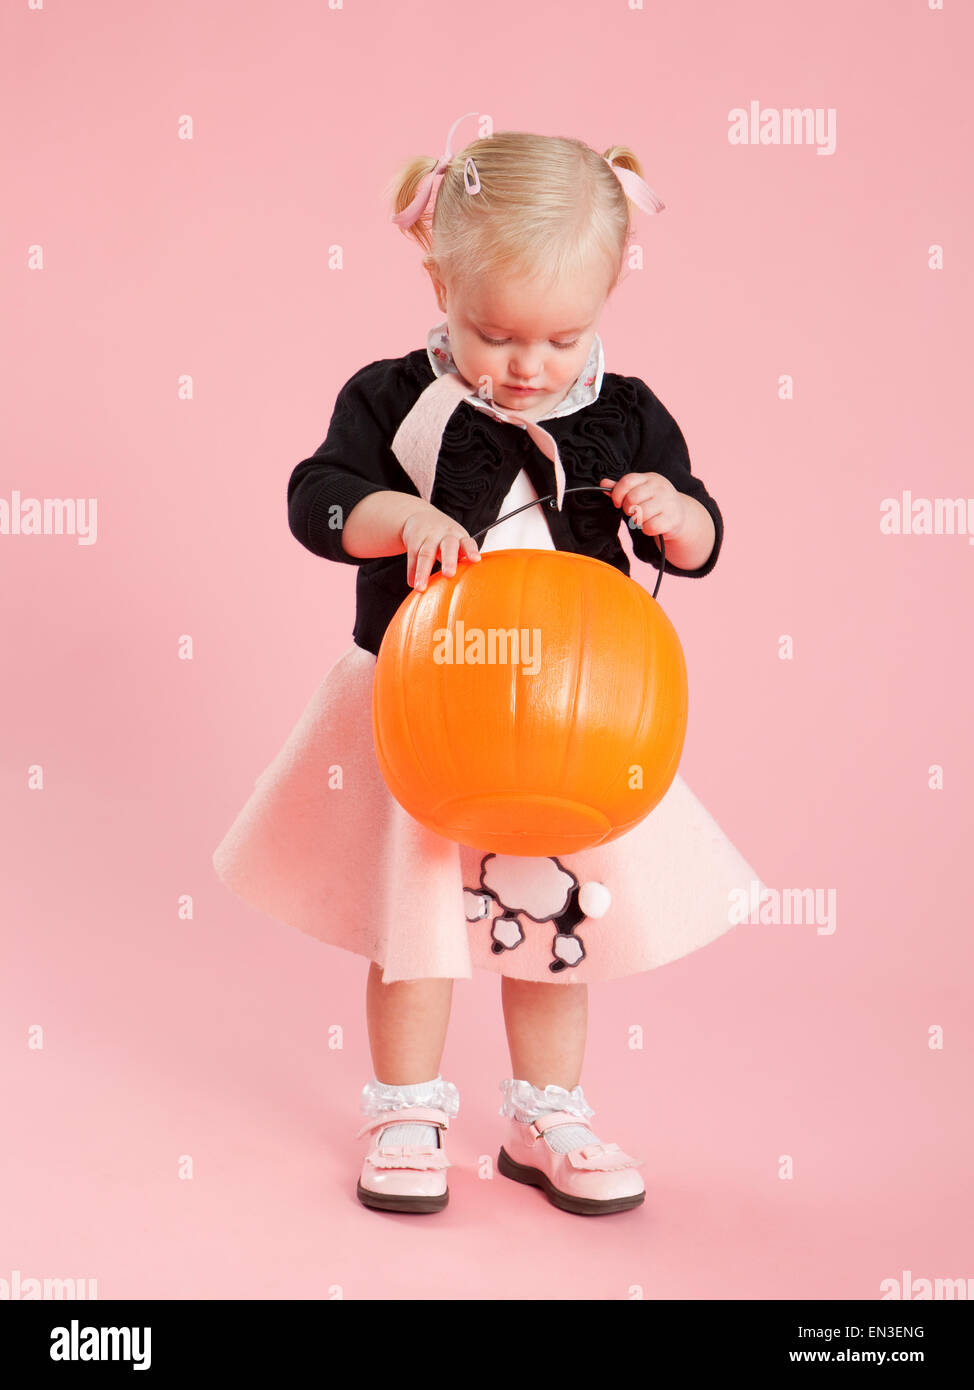 Baby girl (12-17 months) in 1950s style costume, holding pumpkin lantern for Halloween Stock Photo